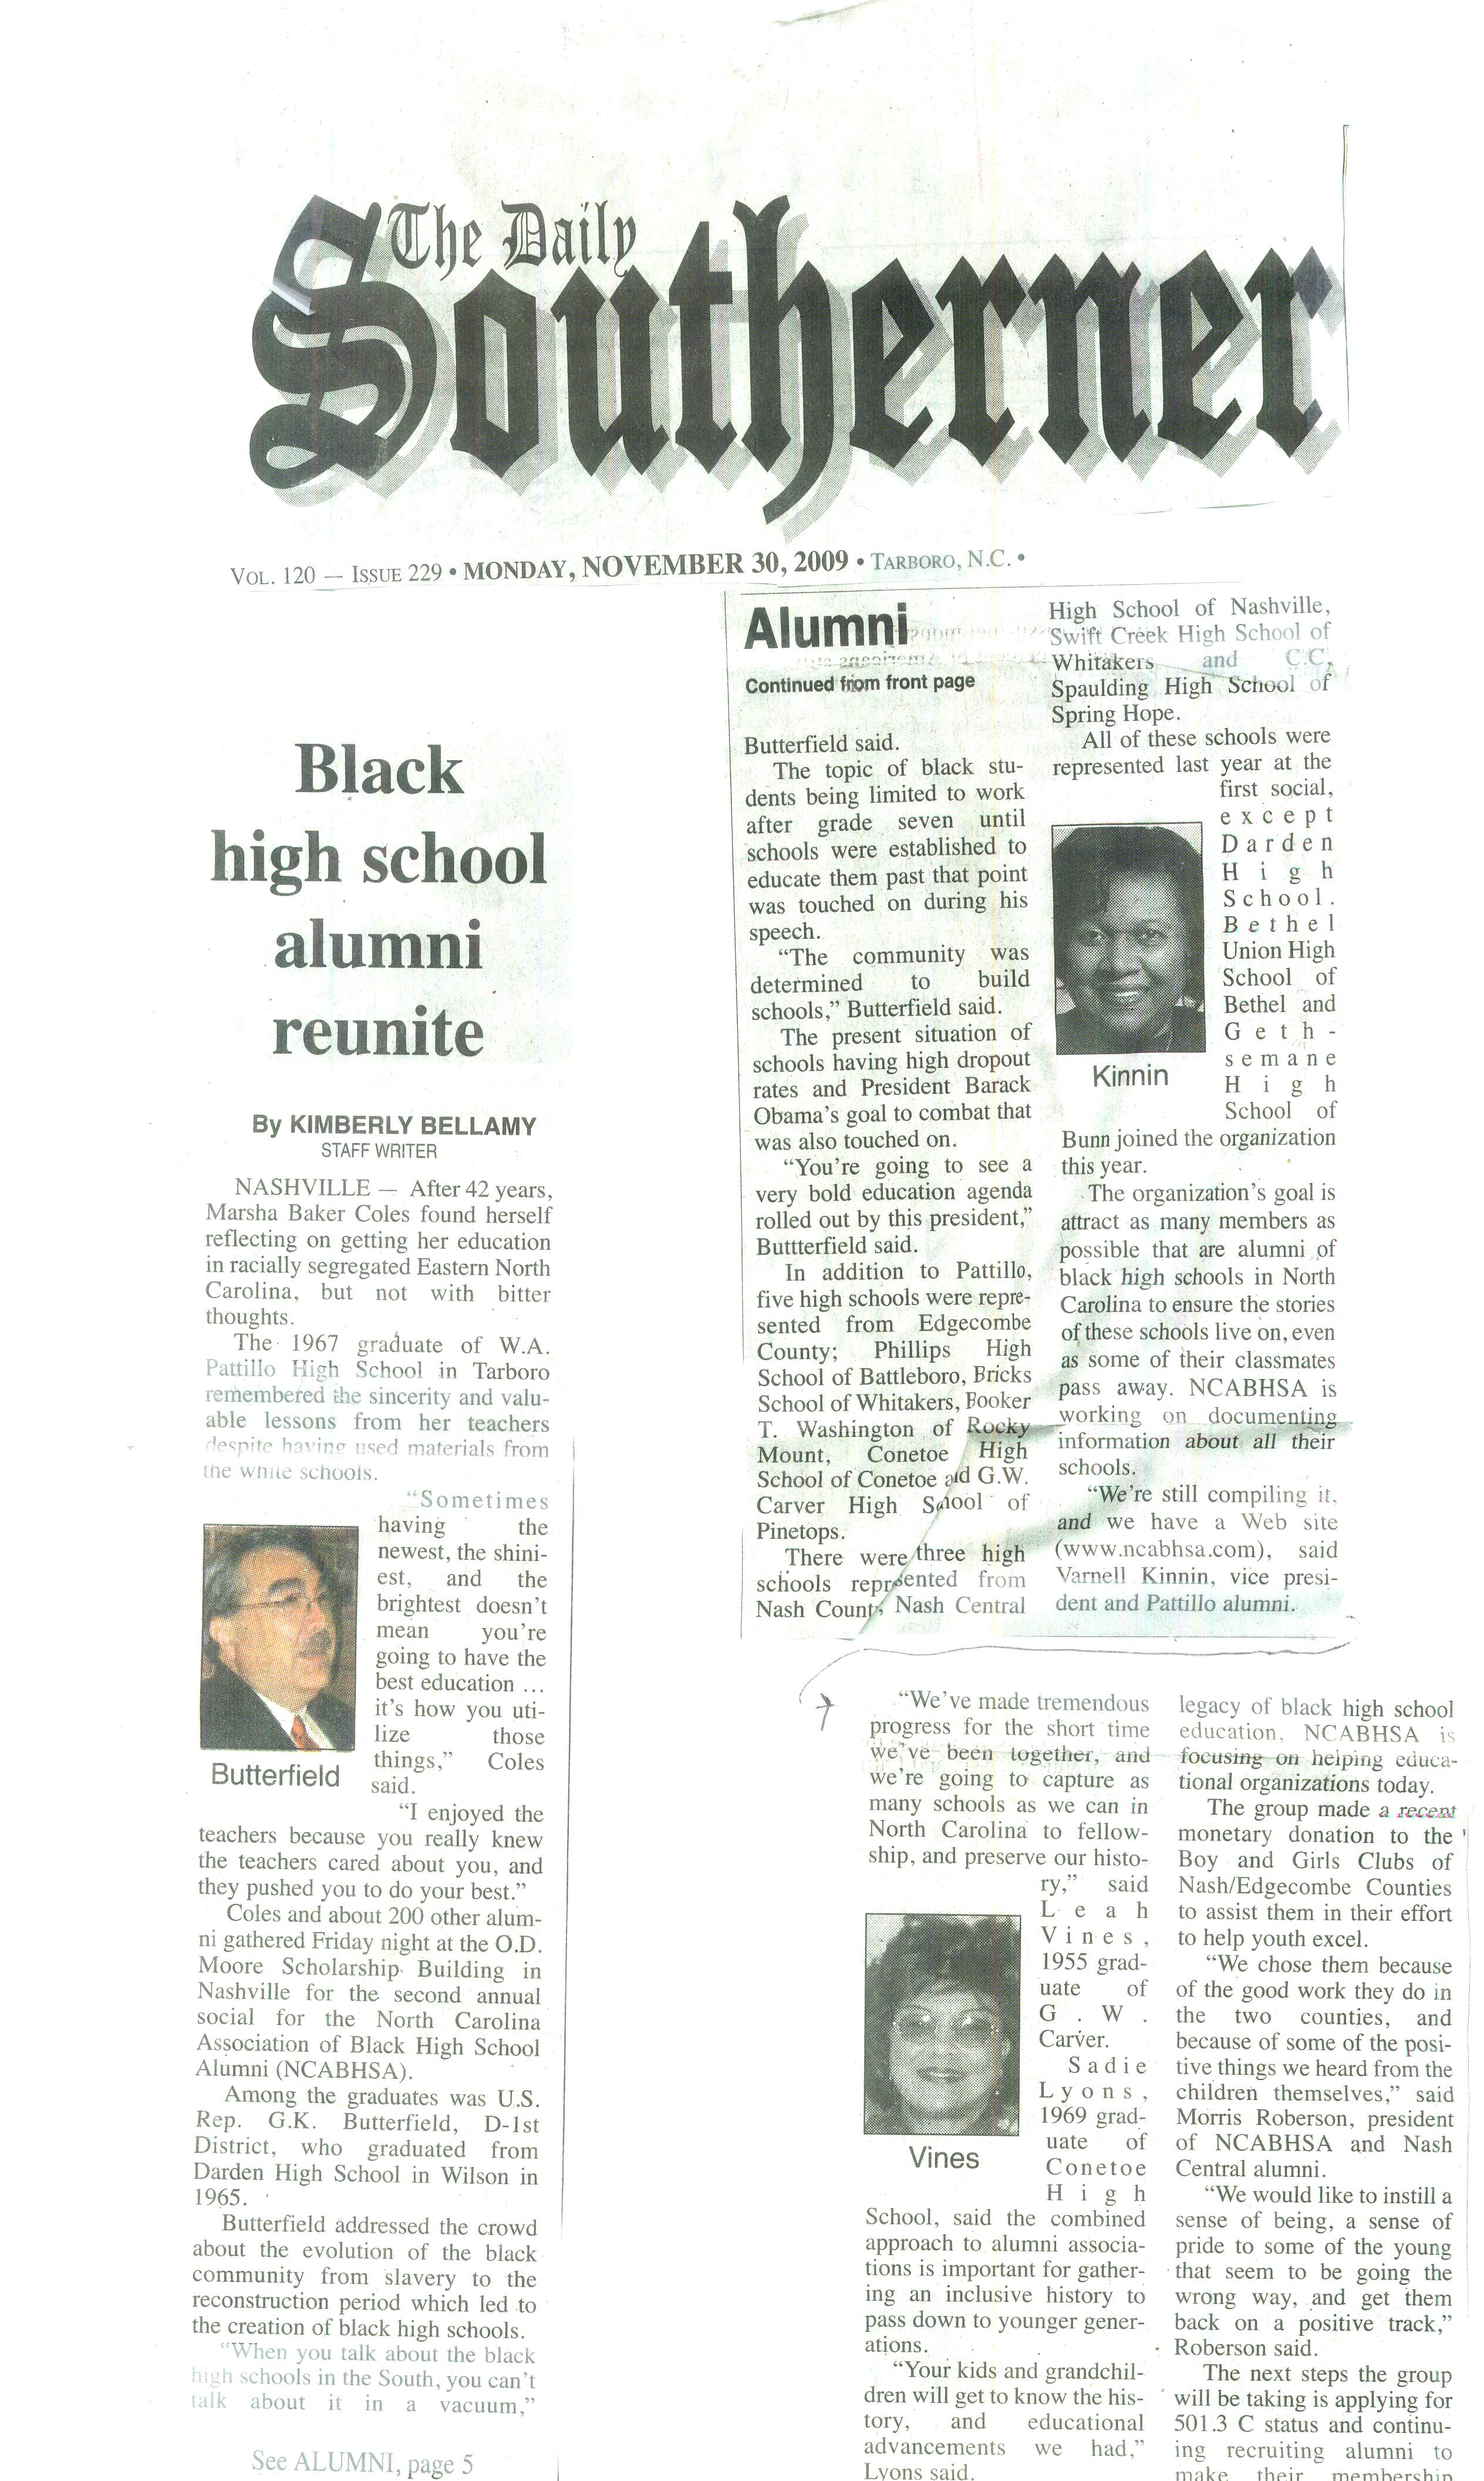 NCABHSA ARTICLE BY REPORT KIMBERLY BELLAMY FROM THE TARBORO DAILY SOUTHERNER, NOVEMBER 30, 2009